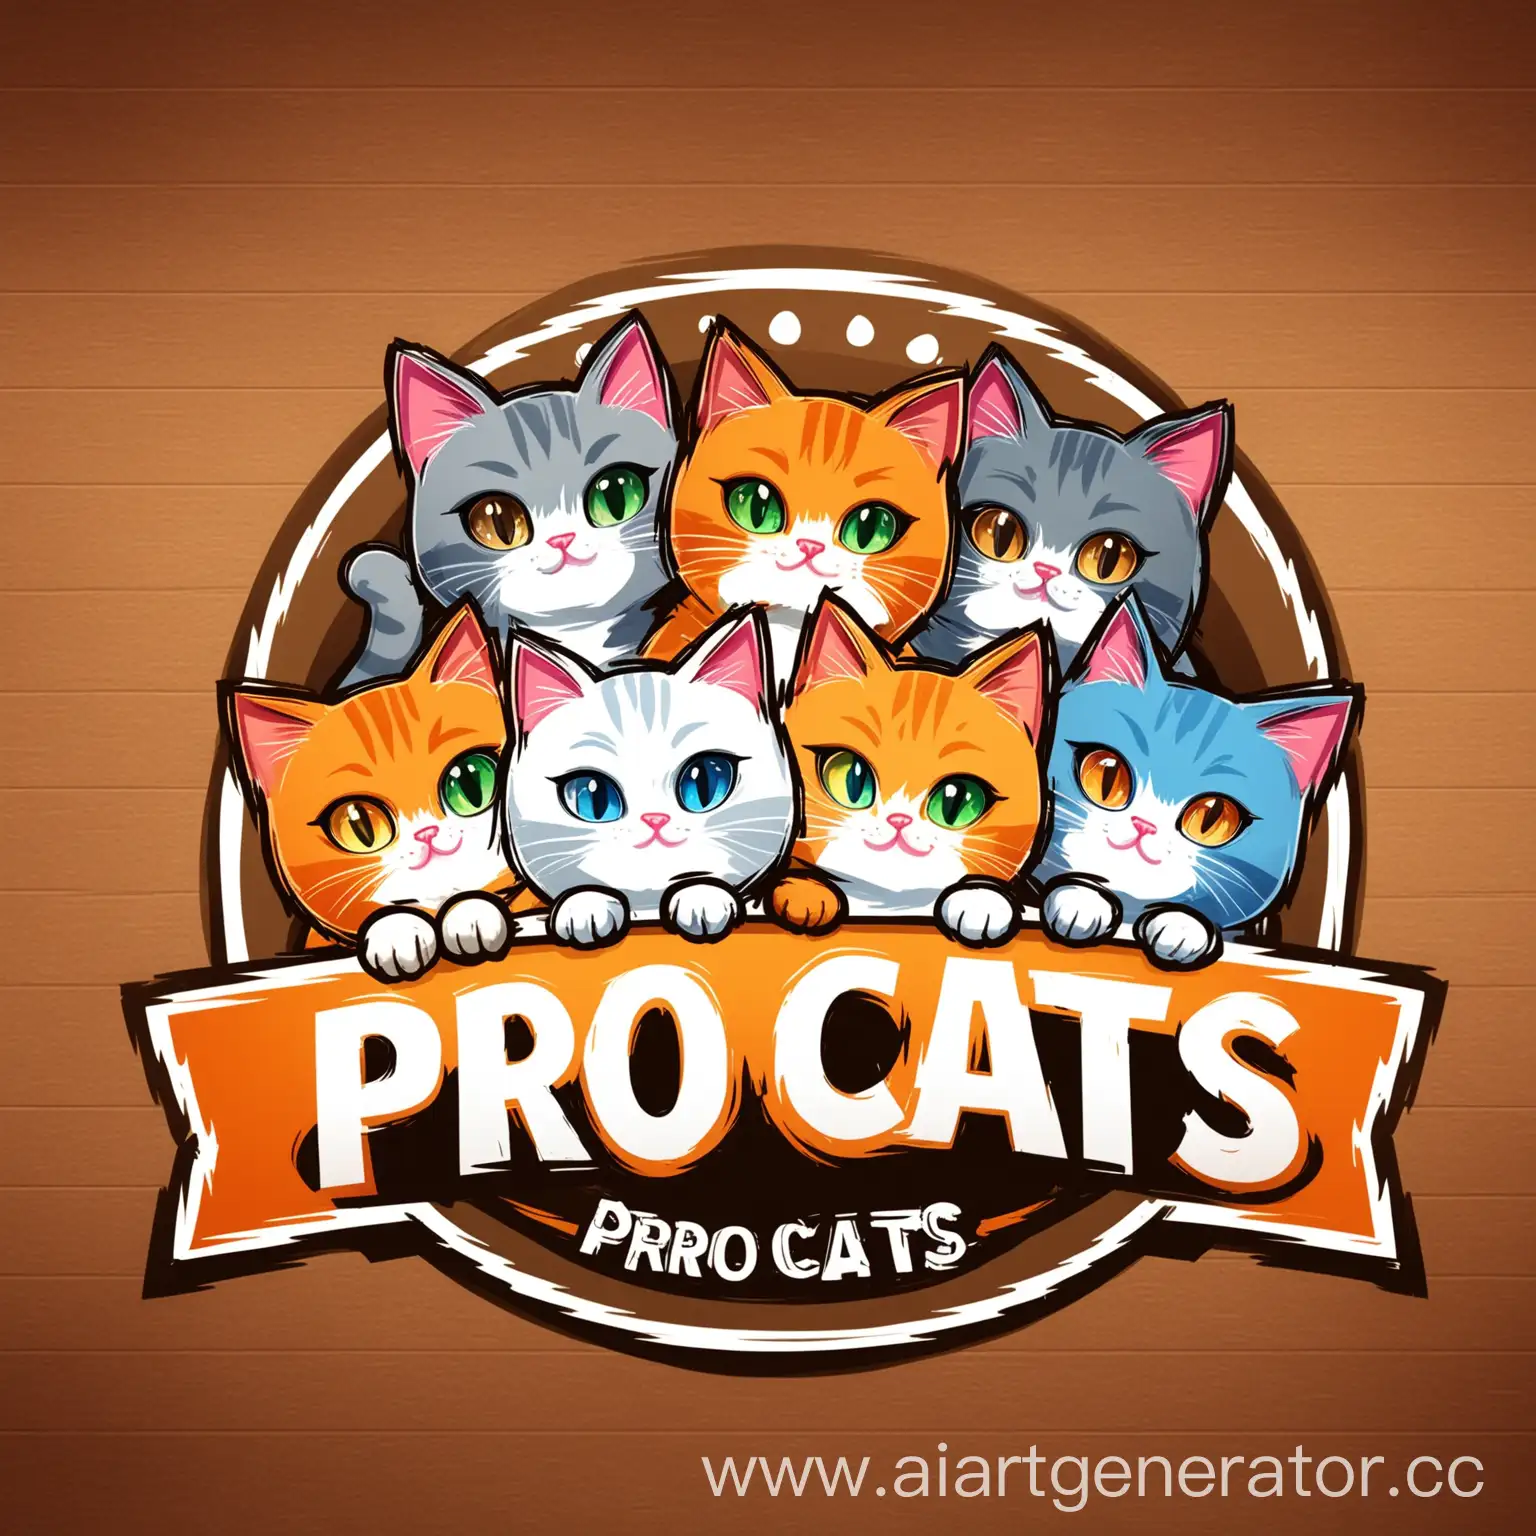 Create a logo for the channel 'Pro Cats'. This channel is dedicated to fun and humor in the world of cats. The logo should reflect the playful and entertaining atmosphere of the channel and include elements characteristic of cats. We want the logo to be simple yet memorable, and suitable for use in covers, banners, and social media profiles. Please make sure to include the words 'Pro Cats' in the logo.